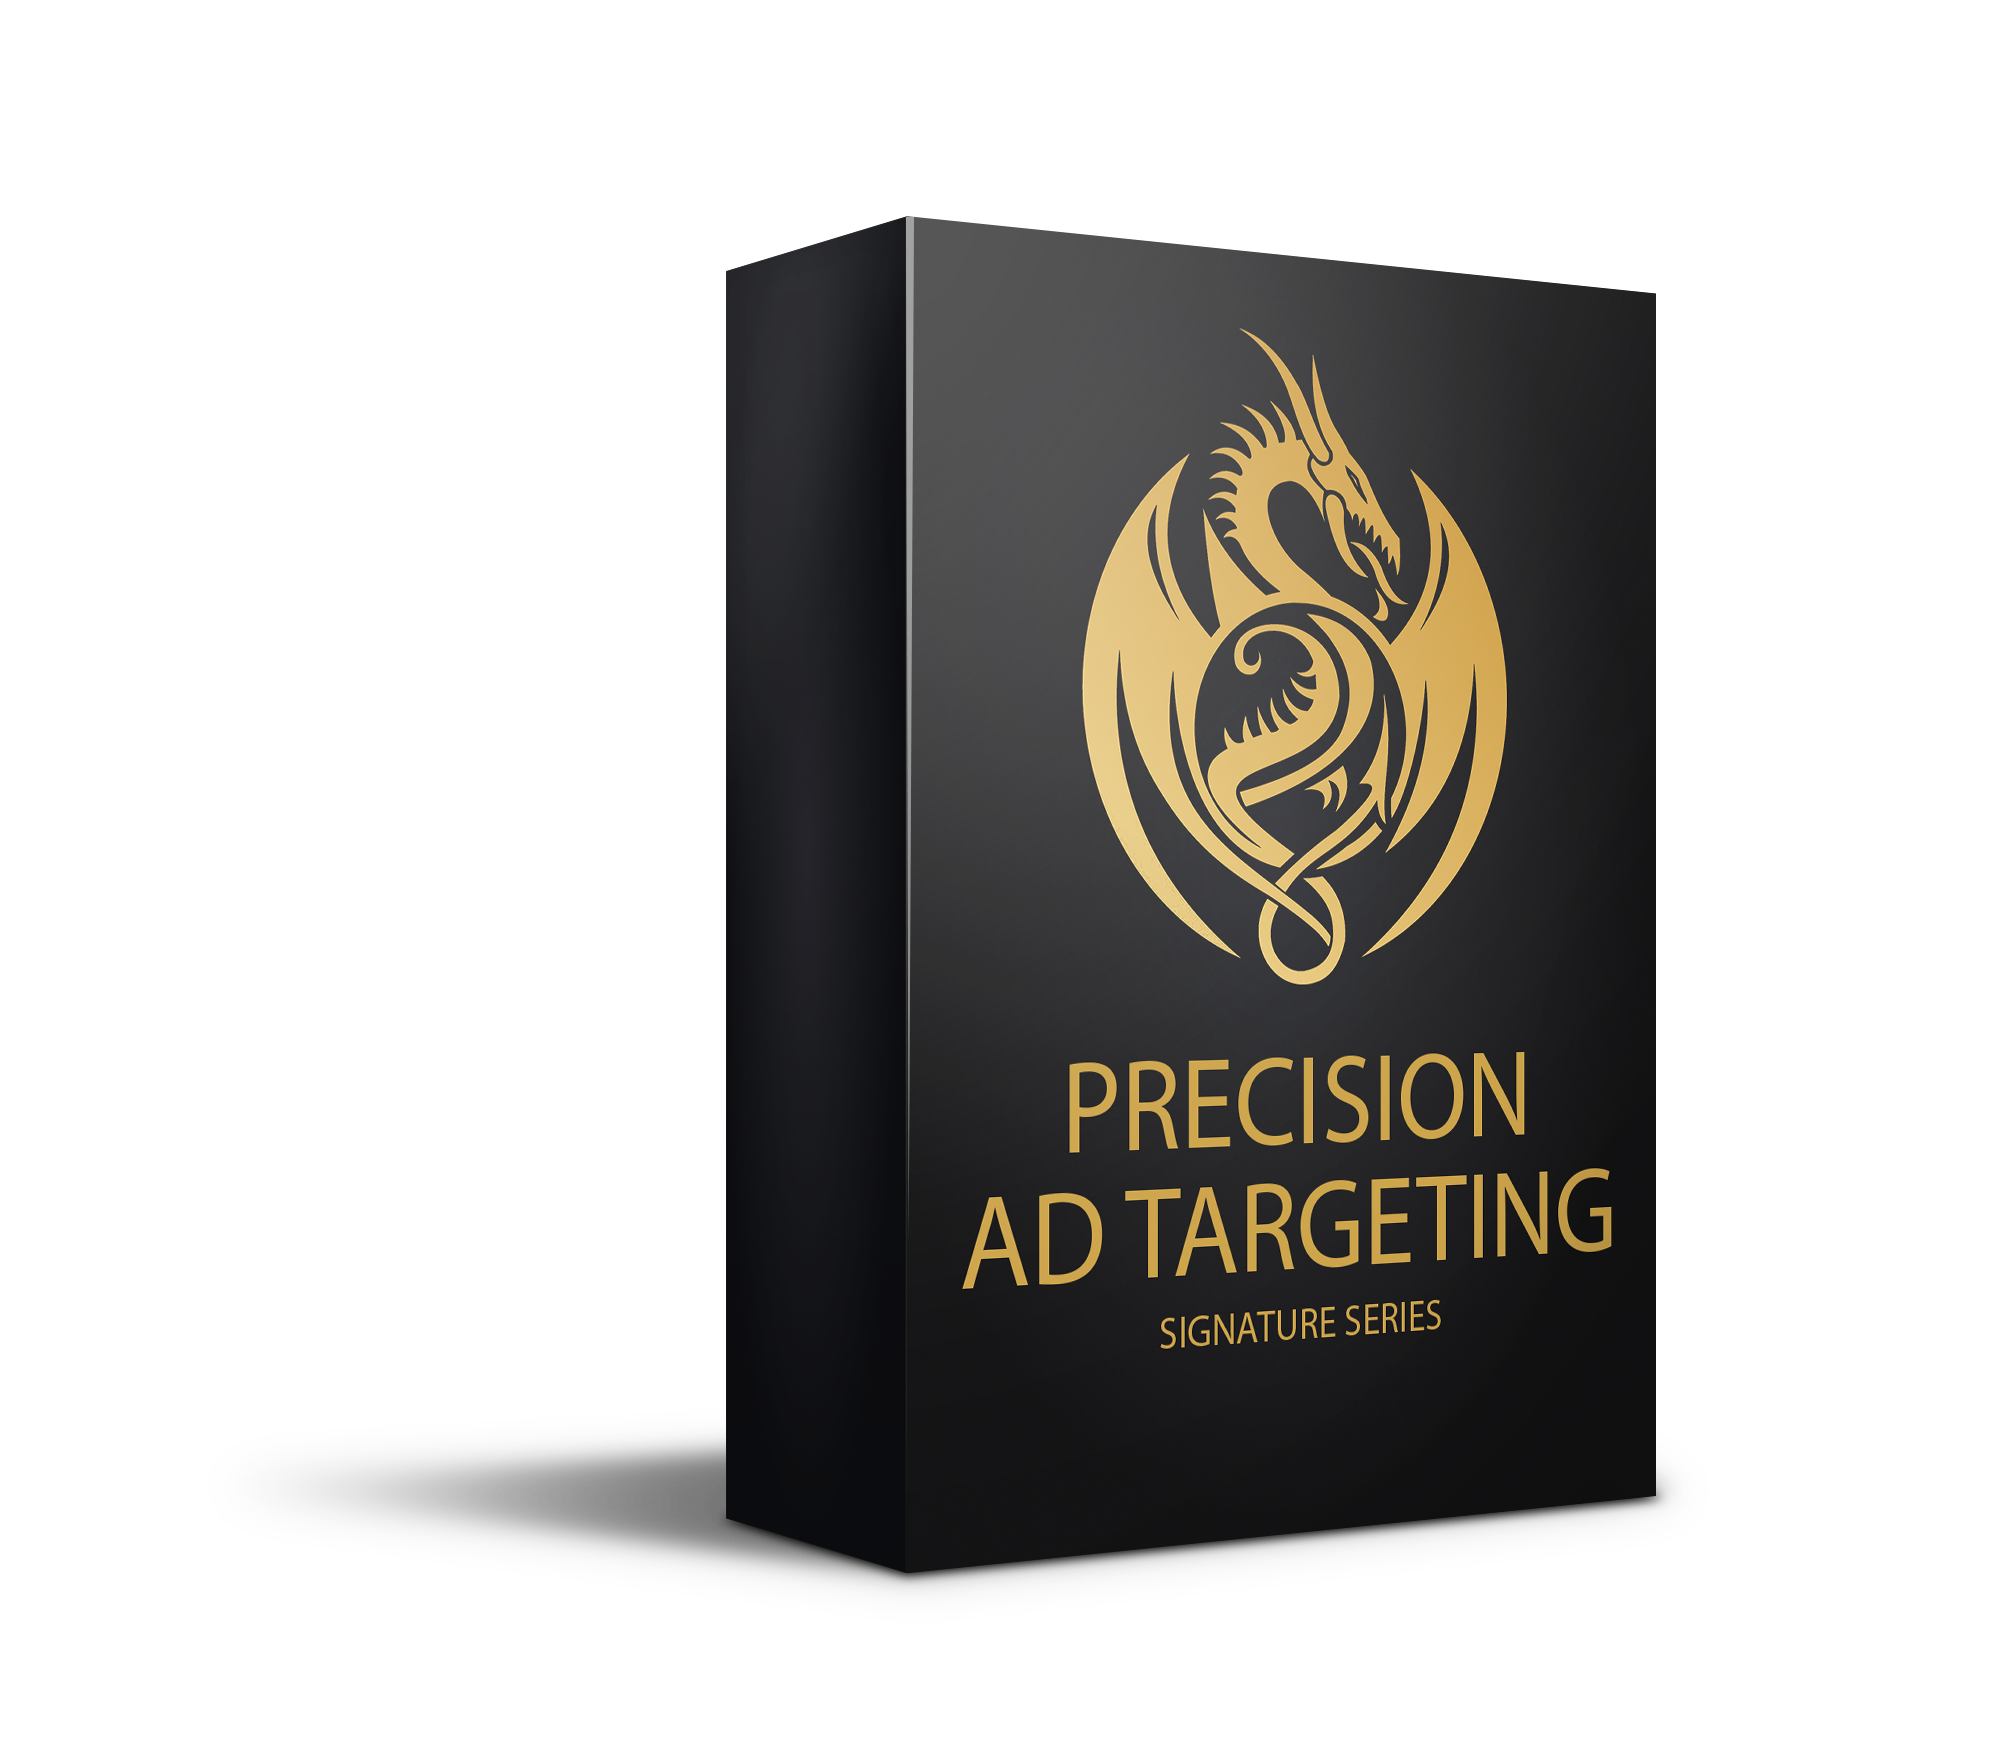 Precision Ad Targeting – 38 minutes